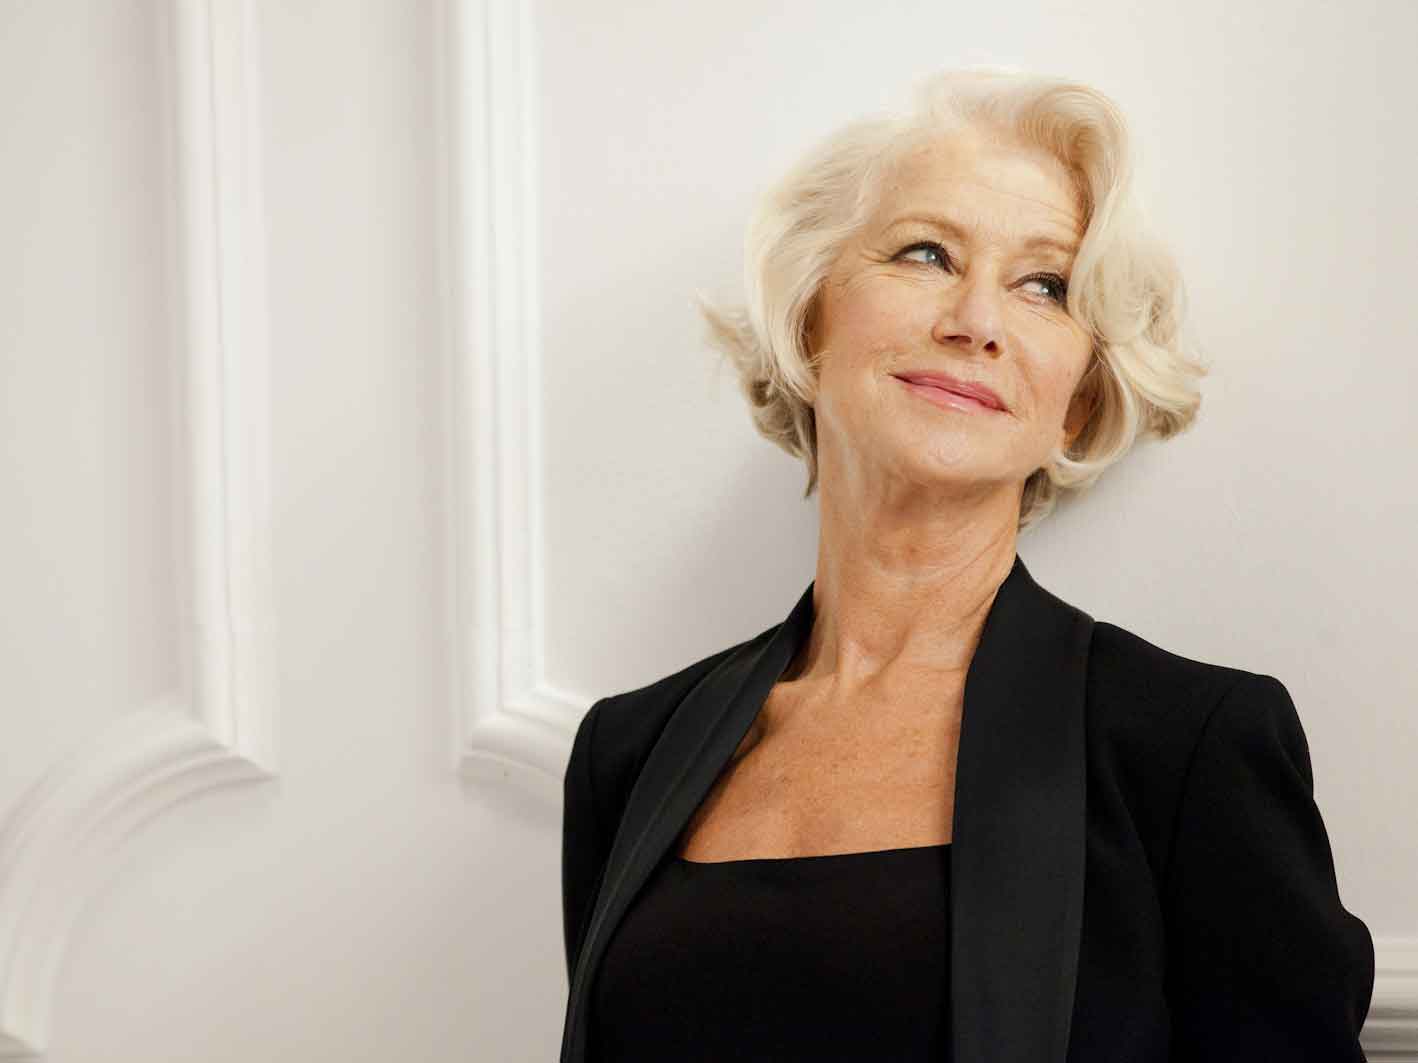 Helen Mirren: 'I want to say "tell him to get his damned arm off your shoulder"'